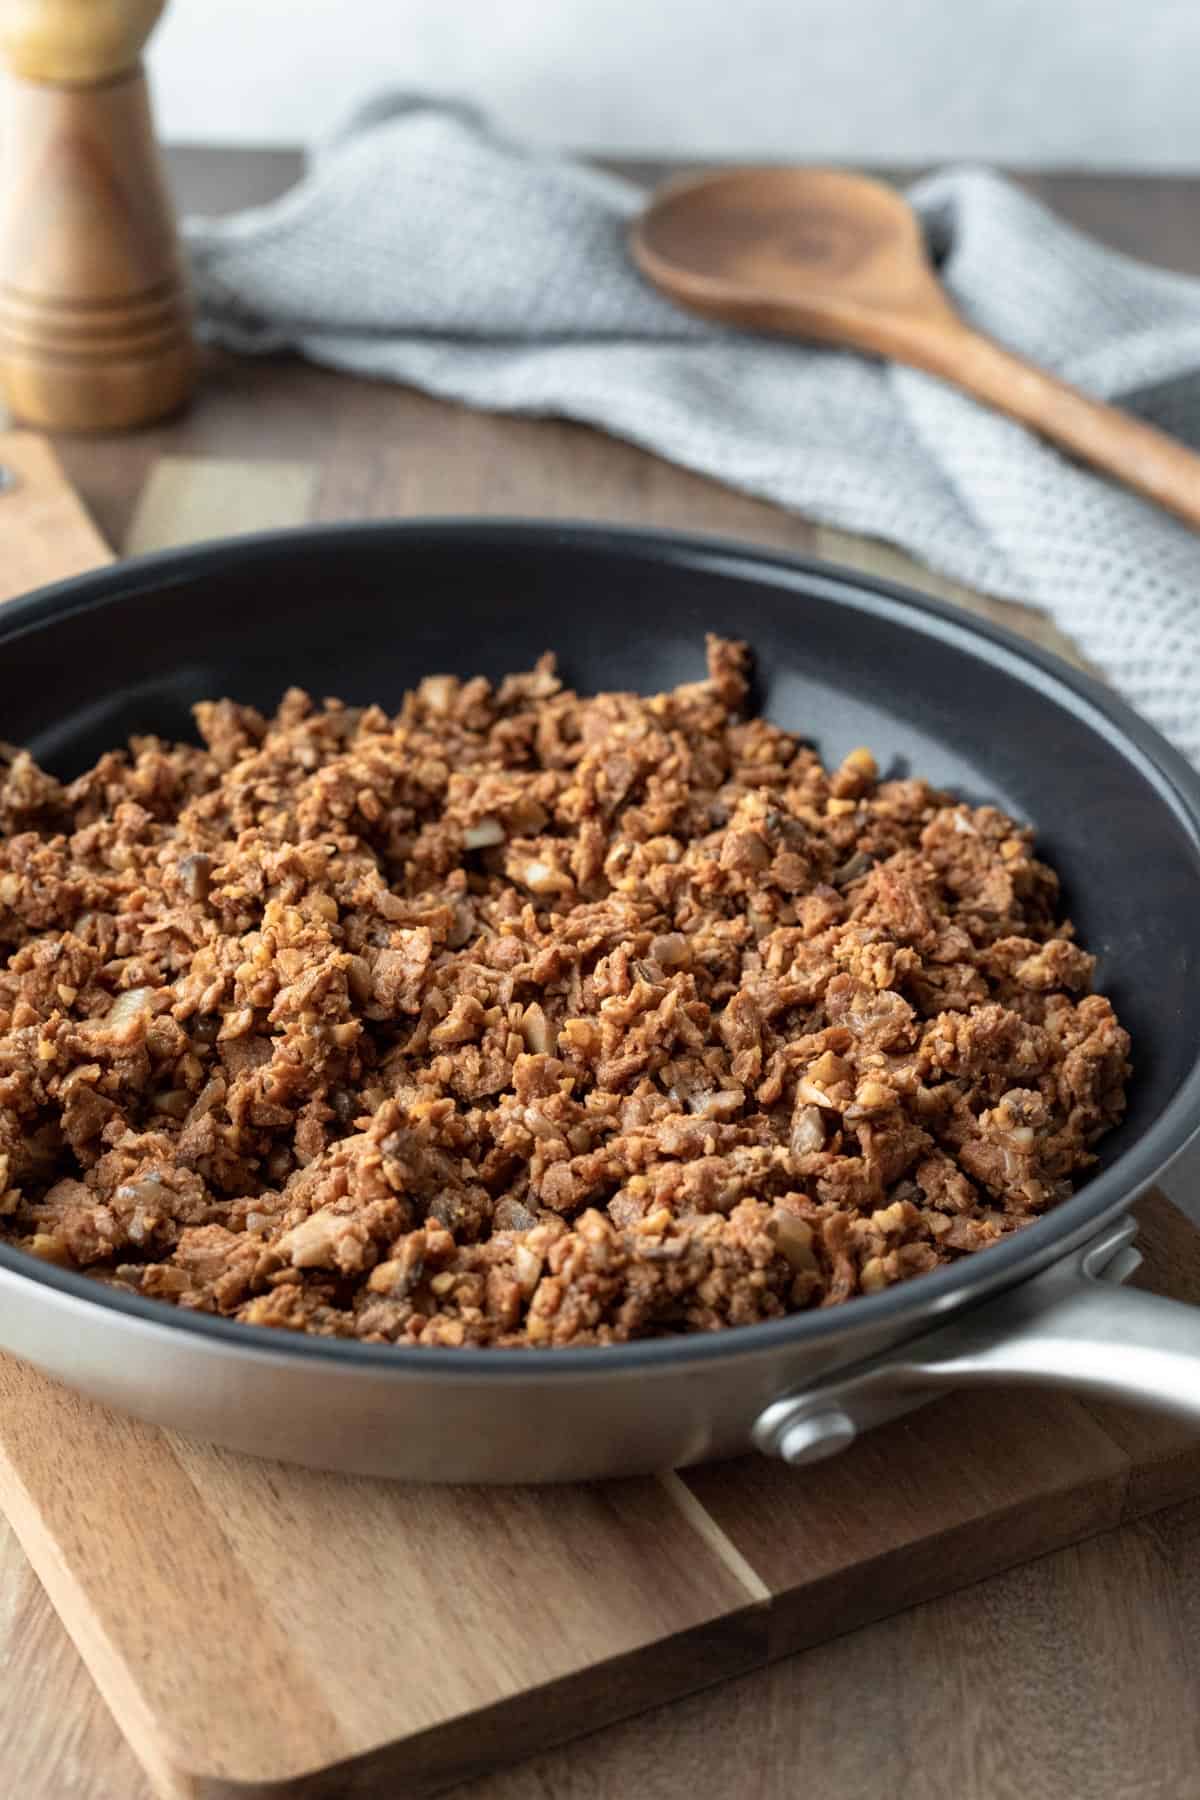 Crumbly homemade soy beef subsitute in a non-stick skillet.